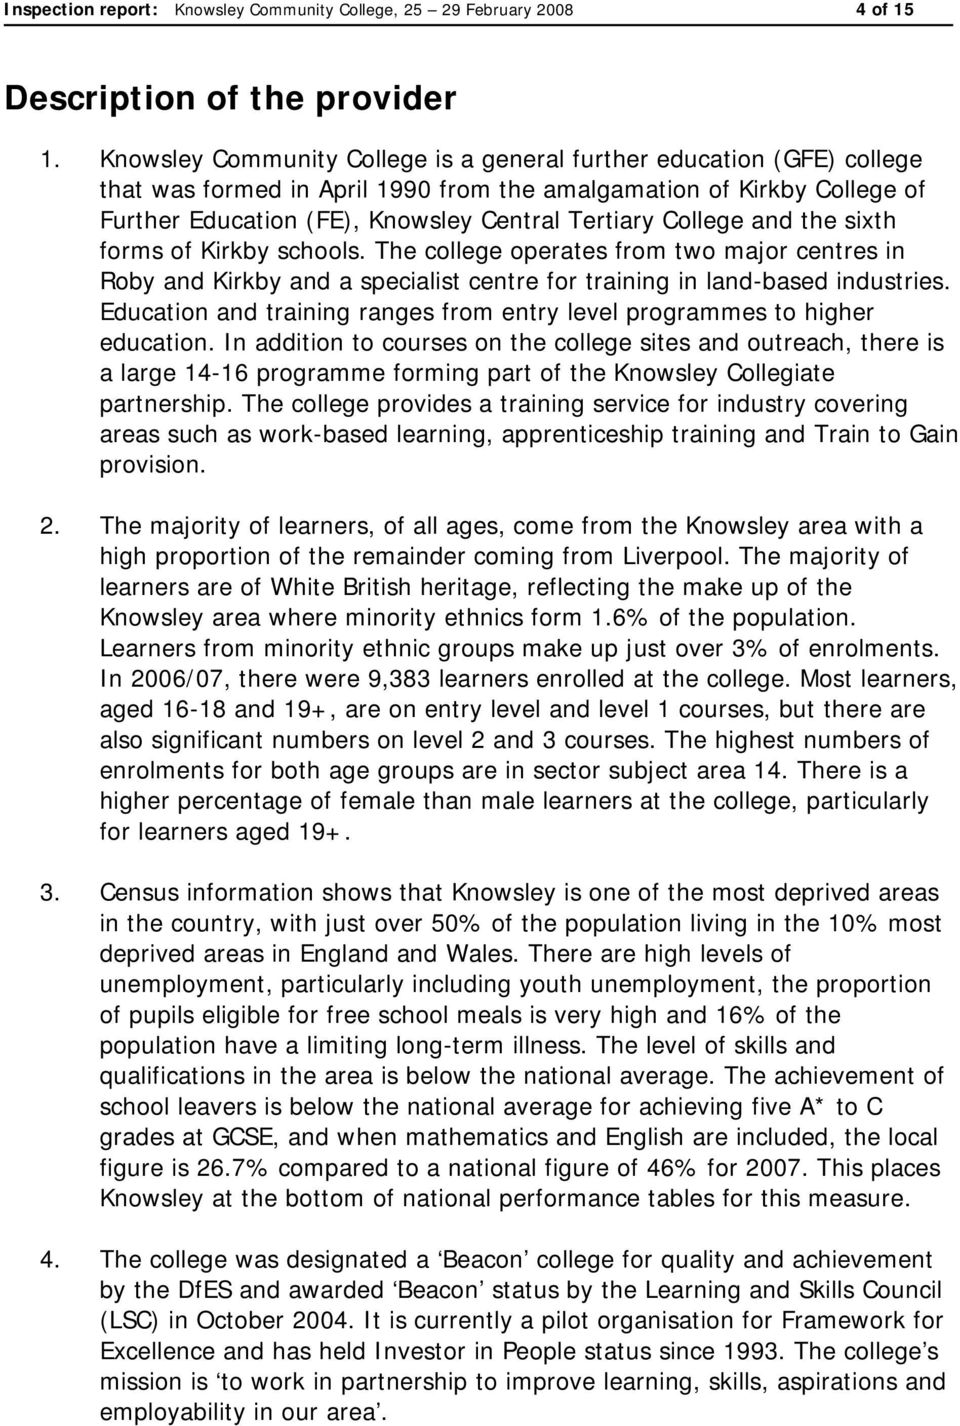 College and the sixth forms of Kirkby schools. The college operates from two major centres in Roby and Kirkby and a specialist centre for training in land-based industries.